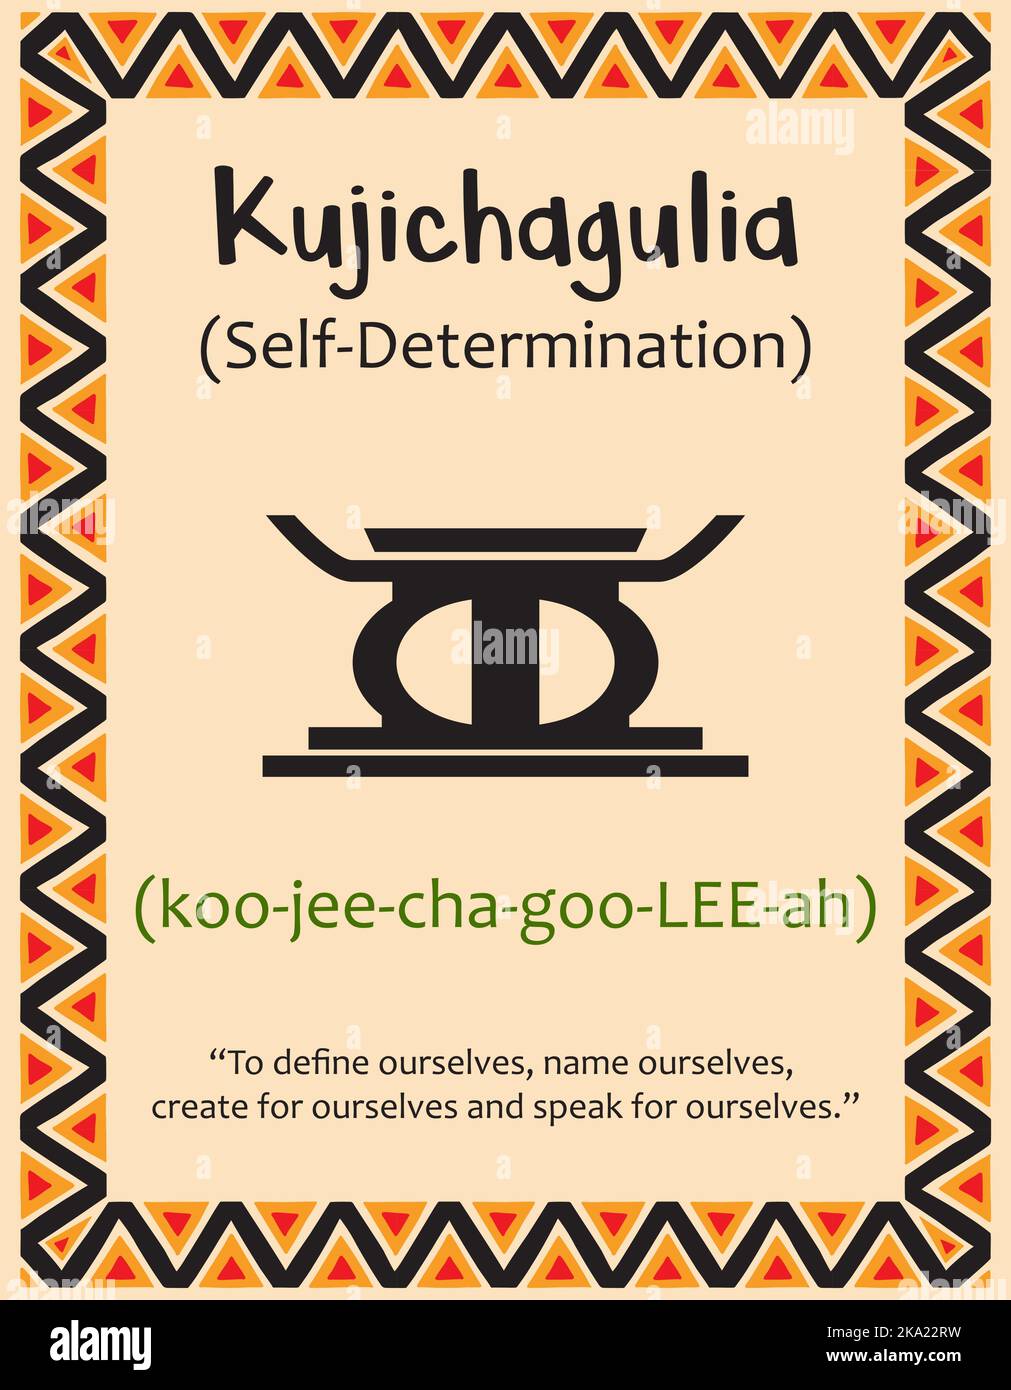 A card with one of the Kwanzaa principles. Symbol Kujichagulia means Self-determination in Swahili. Poster with sign and description. Ethnic African p Stock Vector